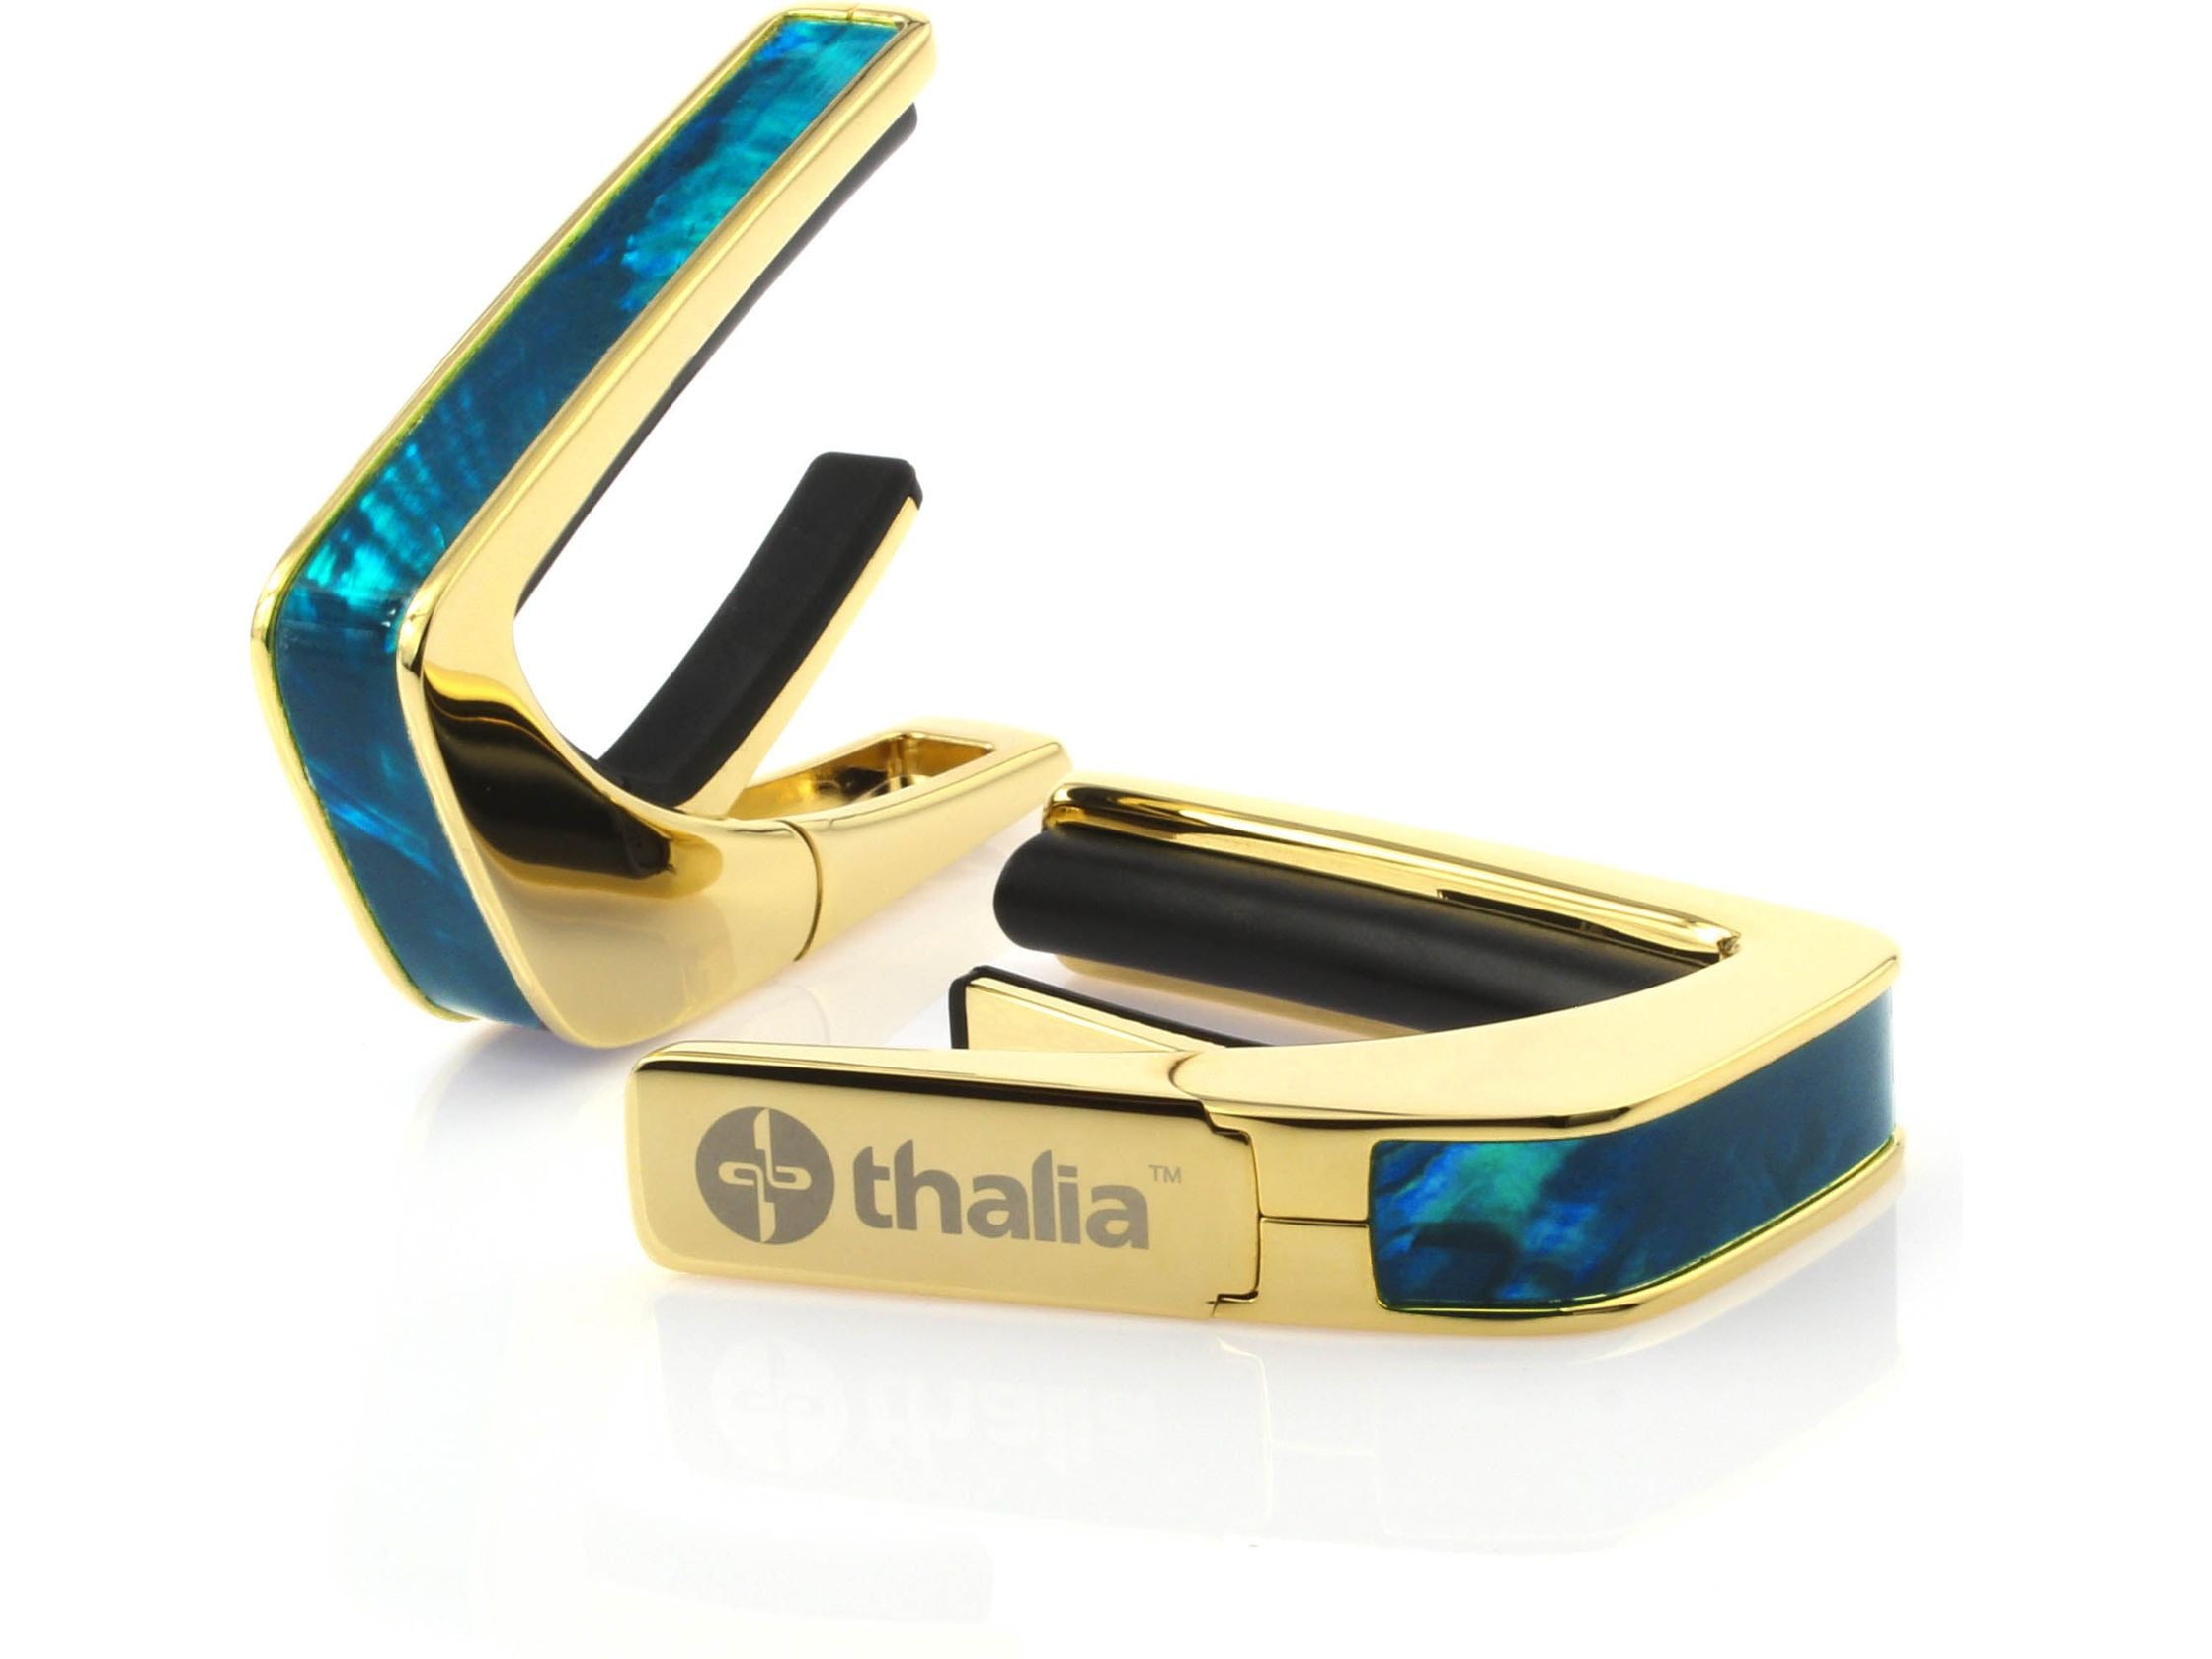 Thalia Exotic Series Shell Collection Capo ~ Gold with Teal Angel Wing Inlay